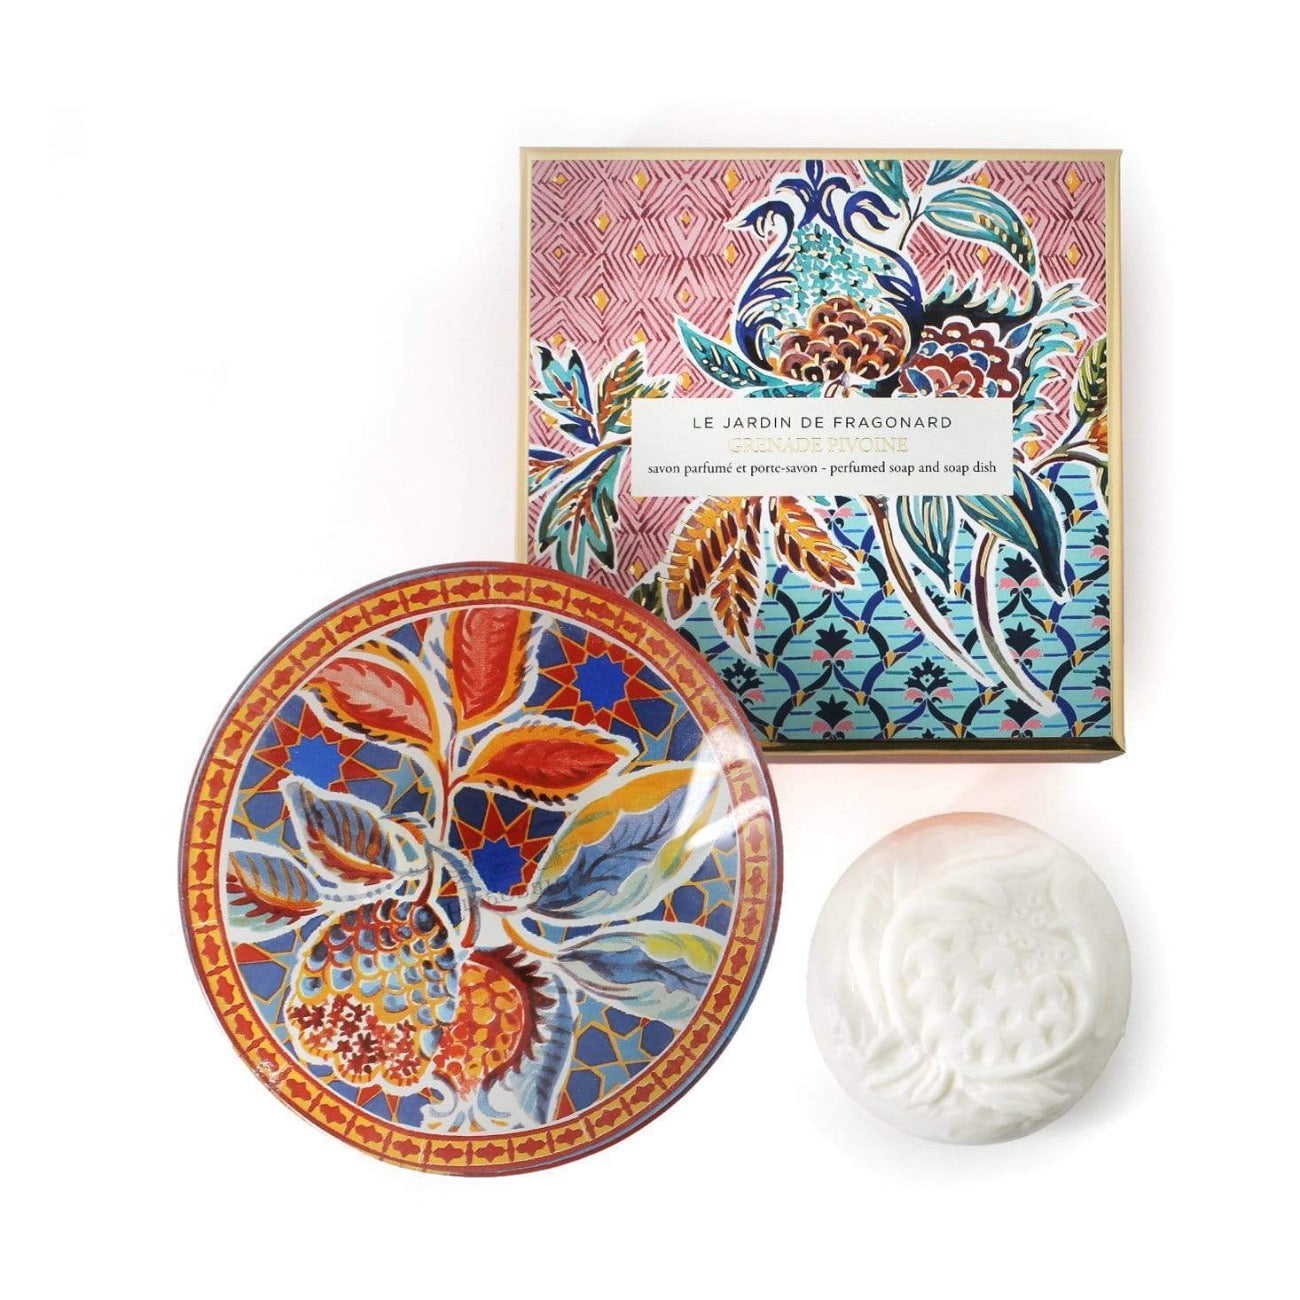 Fragonard French boxed gift set of soap and glass dish, grenade pivoine (pomegranate peony).